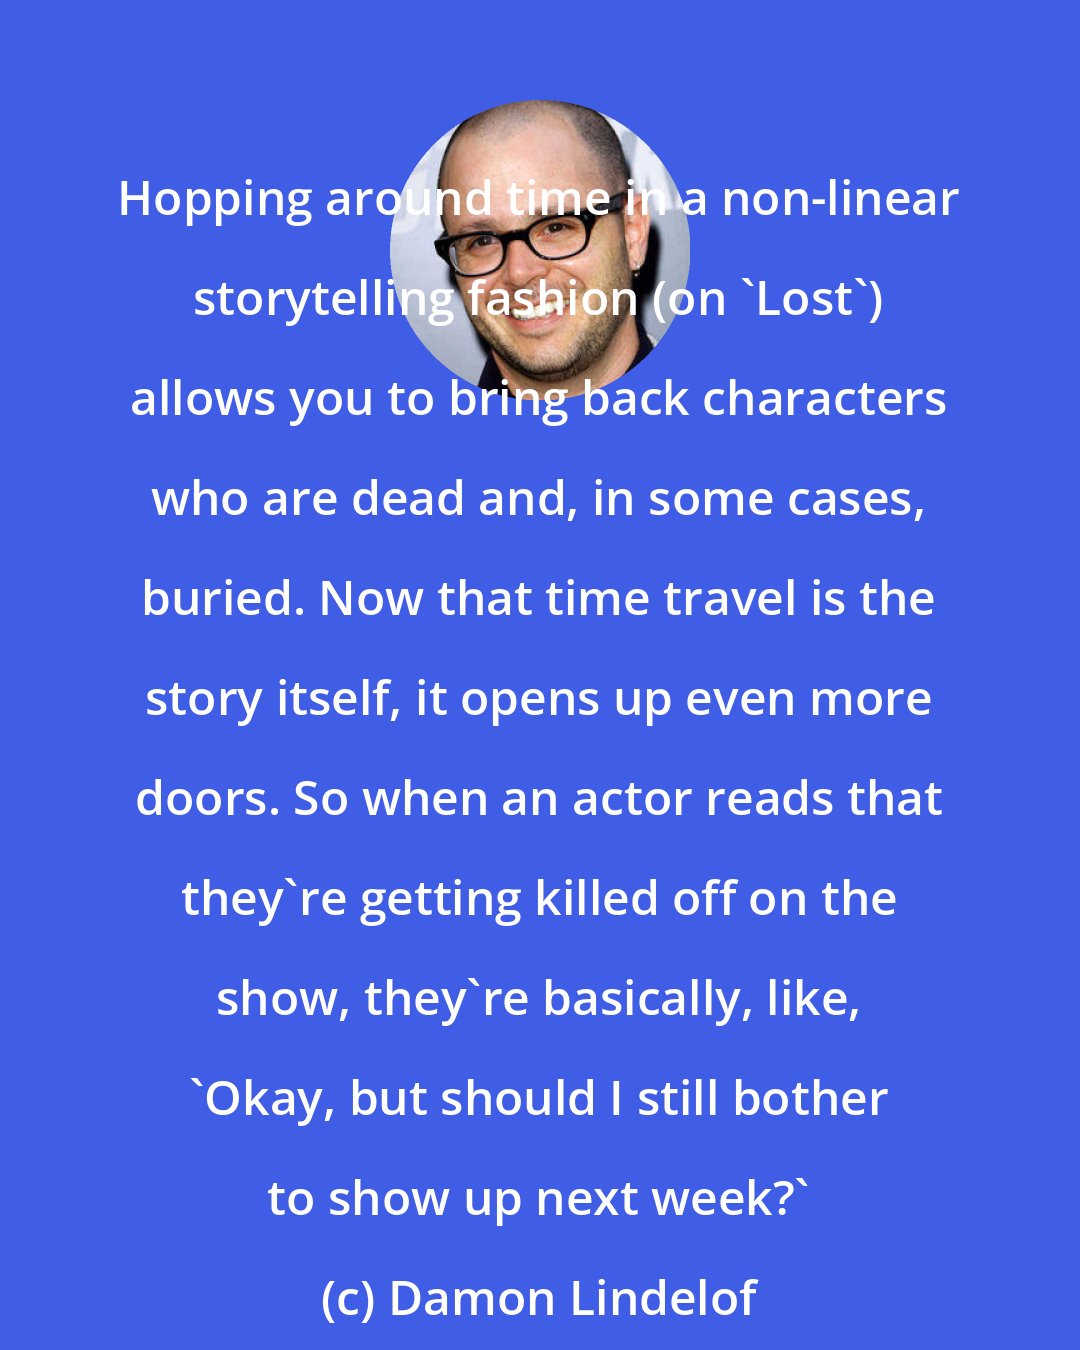 Damon Lindelof: Hopping around time in a non-linear storytelling fashion (on 'Lost') allows you to bring back characters who are dead and, in some cases, buried. Now that time travel is the story itself, it opens up even more doors. So when an actor reads that they're getting killed off on the show, they're basically, like, 'Okay, but should I still bother to show up next week?'